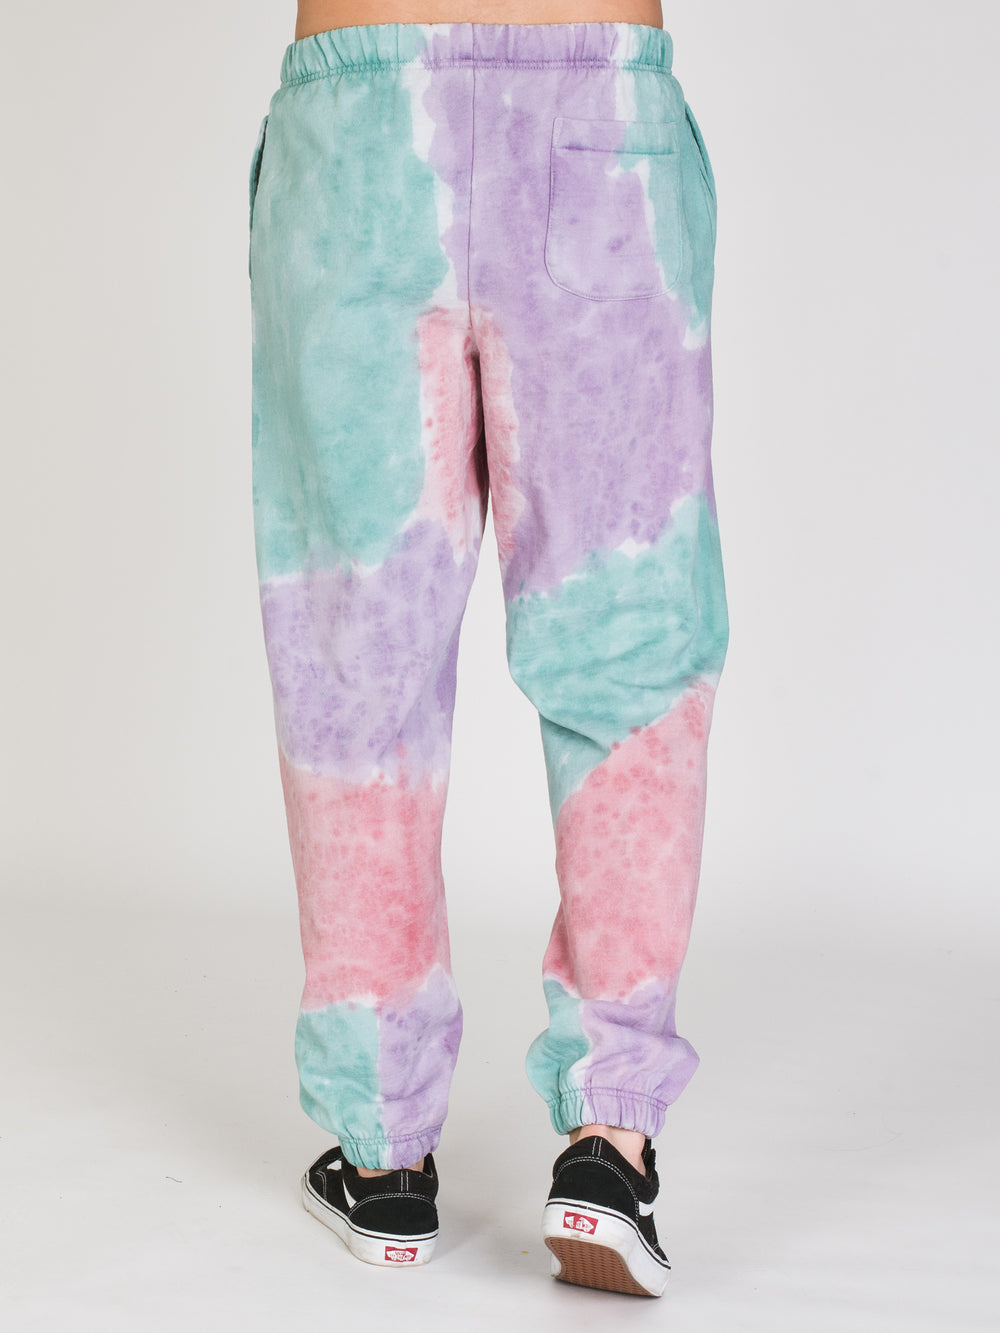 OBEY SUSTAINABLE TIE DYE SWEATPANTS  - CLEARANCE